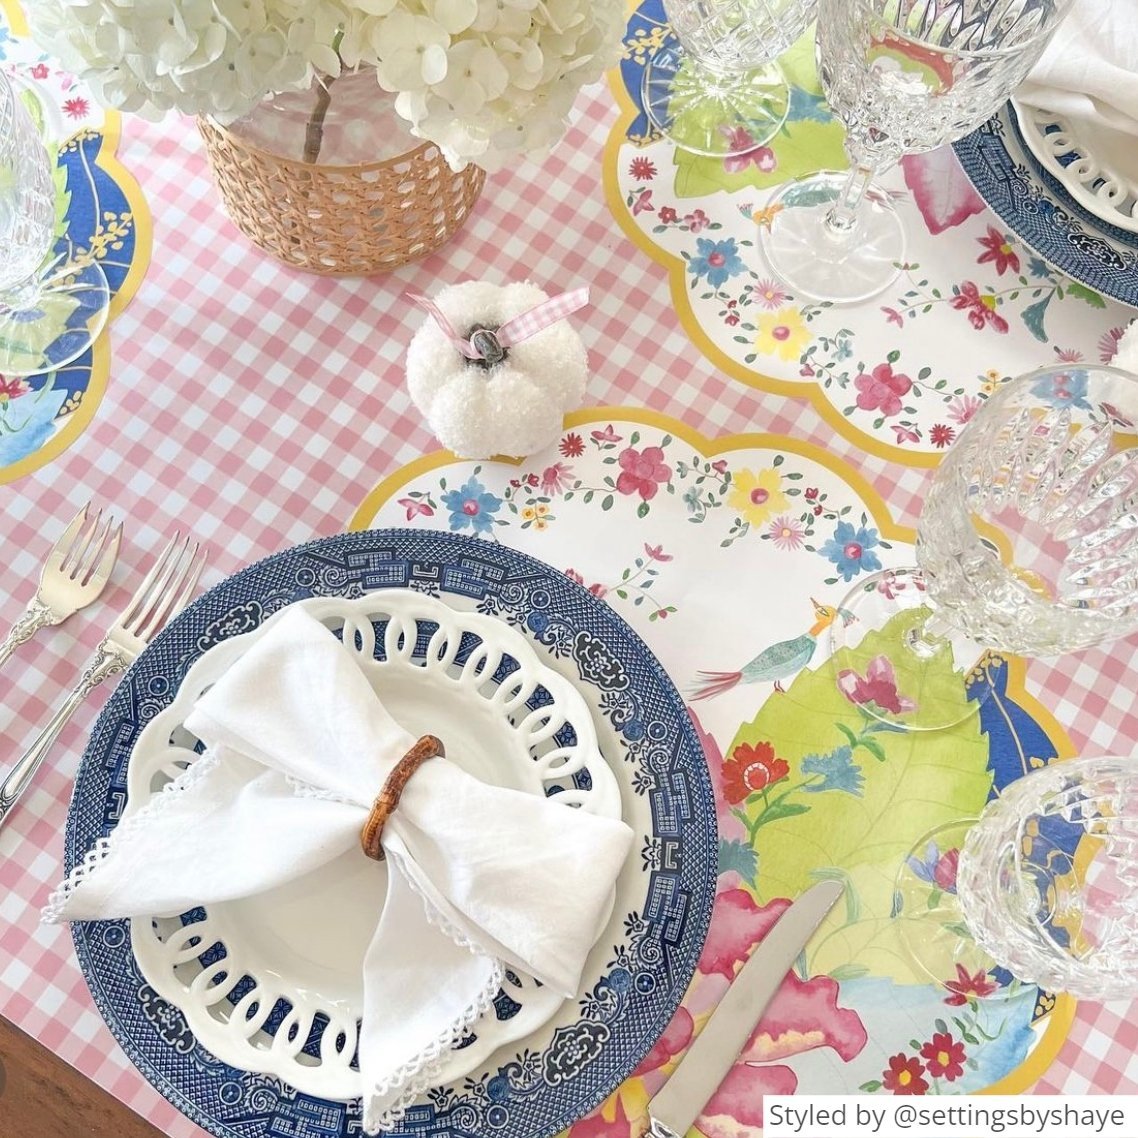 Round scalloped paper placemats featuring a tobacco leaf pattern layered with blue and white plates and a white napkin tied into a bow on top of a pink gingham tablecloth